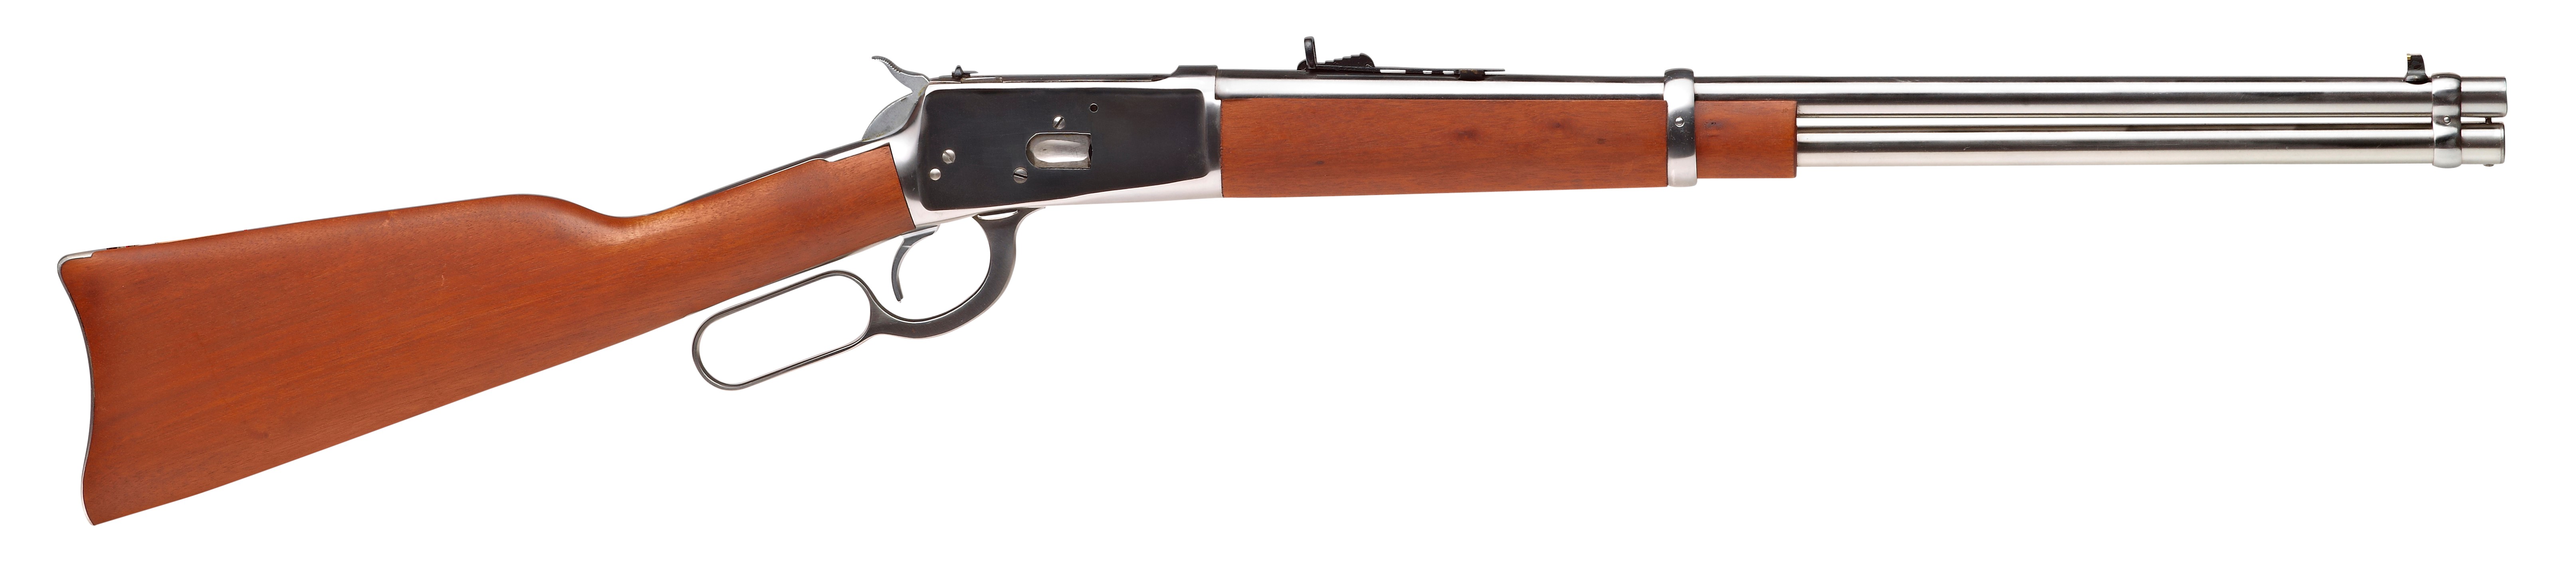 ROSSI R92 357MAG 20" S/S LEVER RIFLE, 10RDS